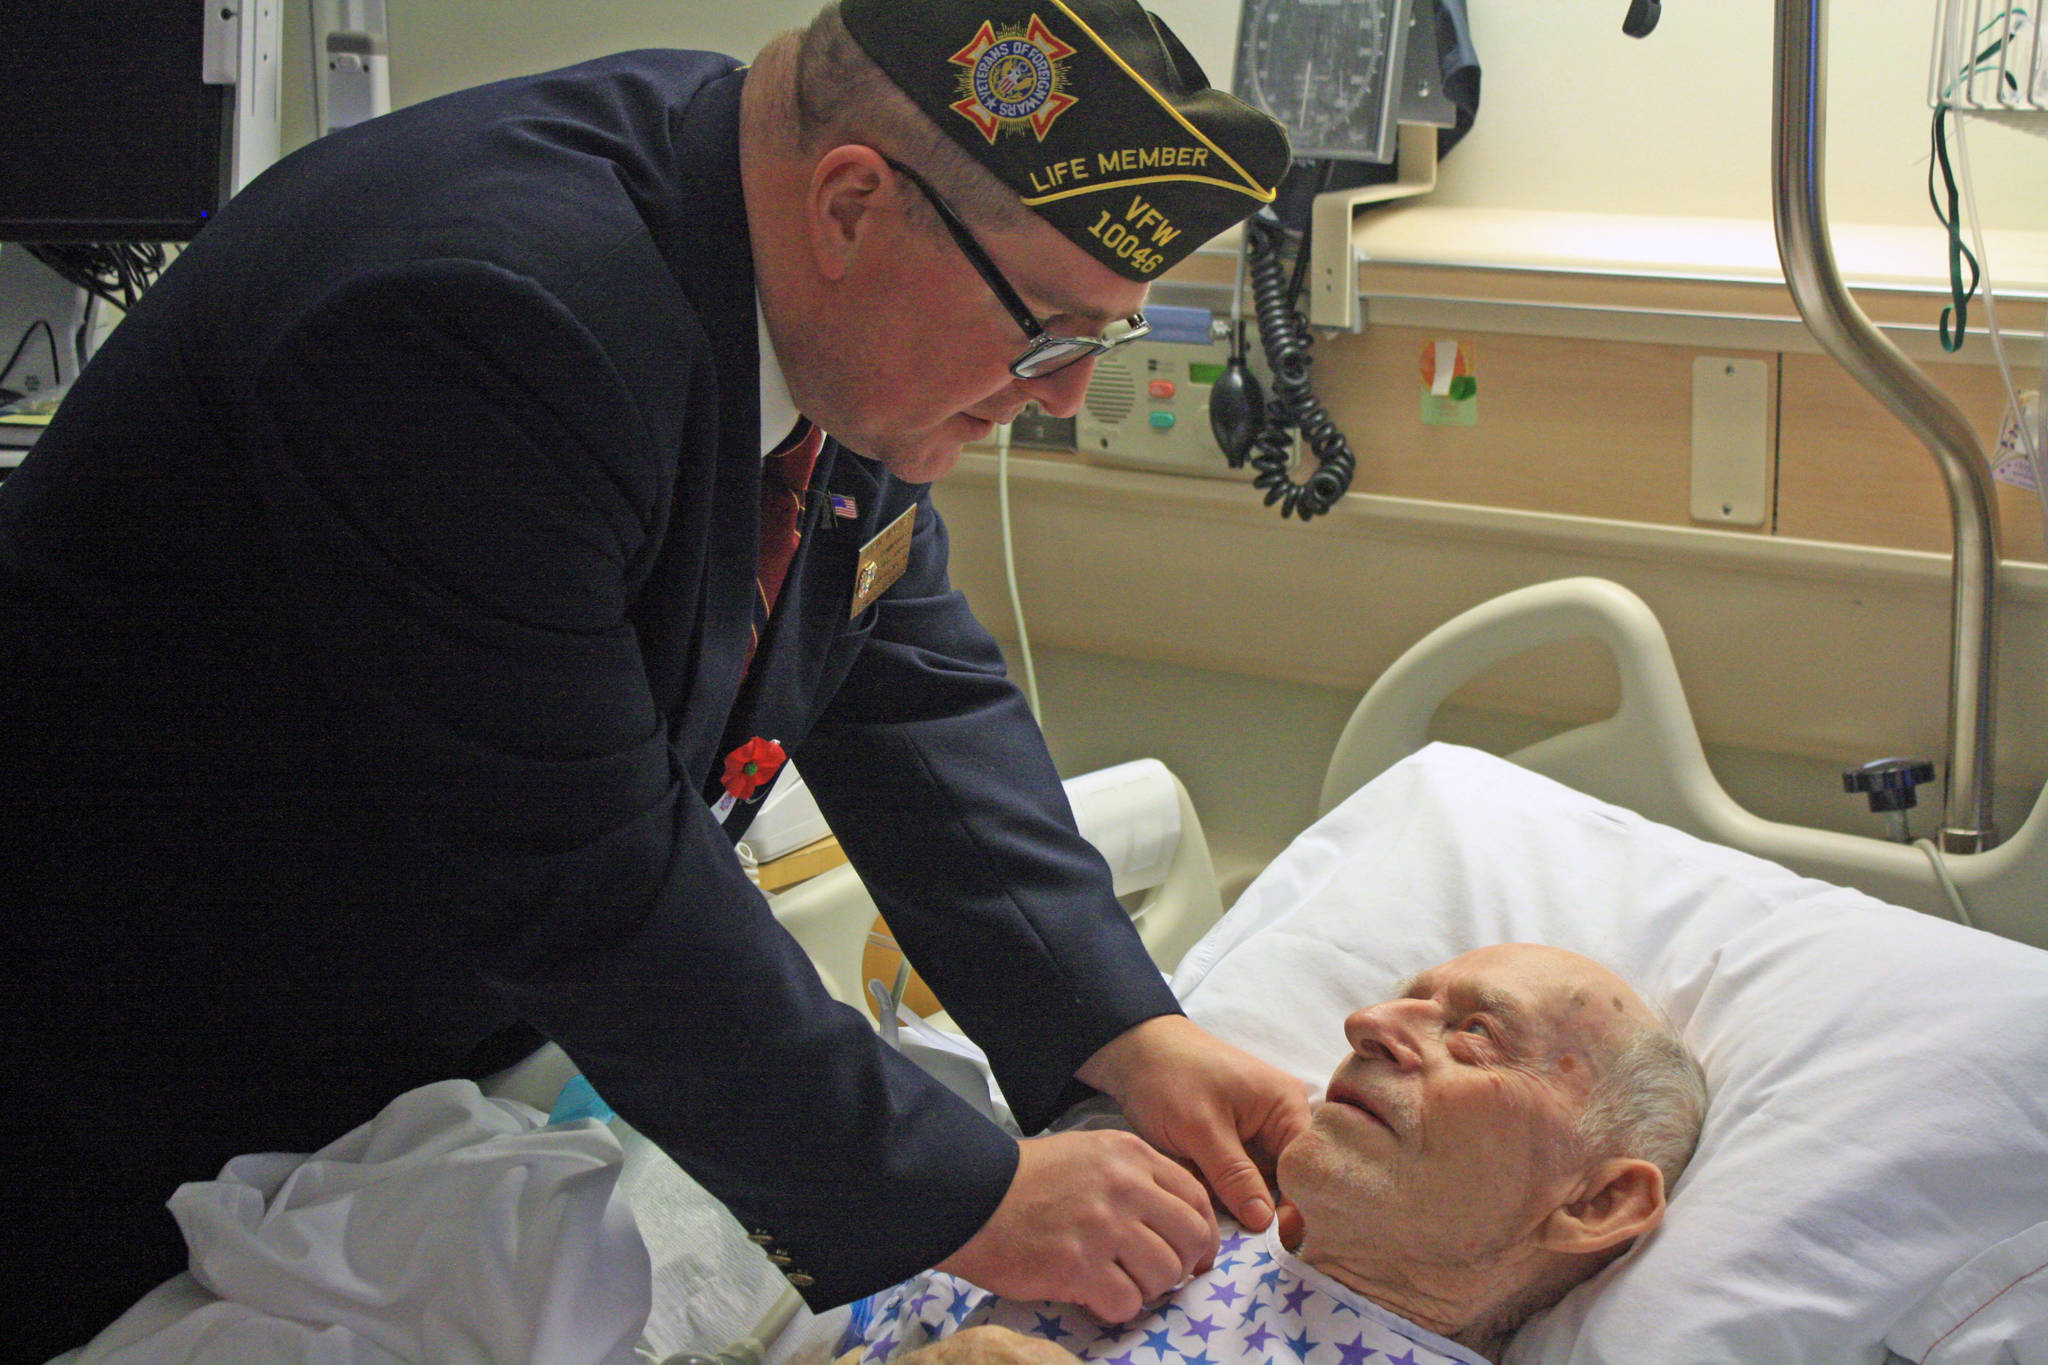 Soldotna VFW Commander John Walker attaches a 70-year service pin to World War II veteran Bill Field at the Central Peninsula Hospital on Monday. (Photo by Erin Thompson/Peninsula Clarion)